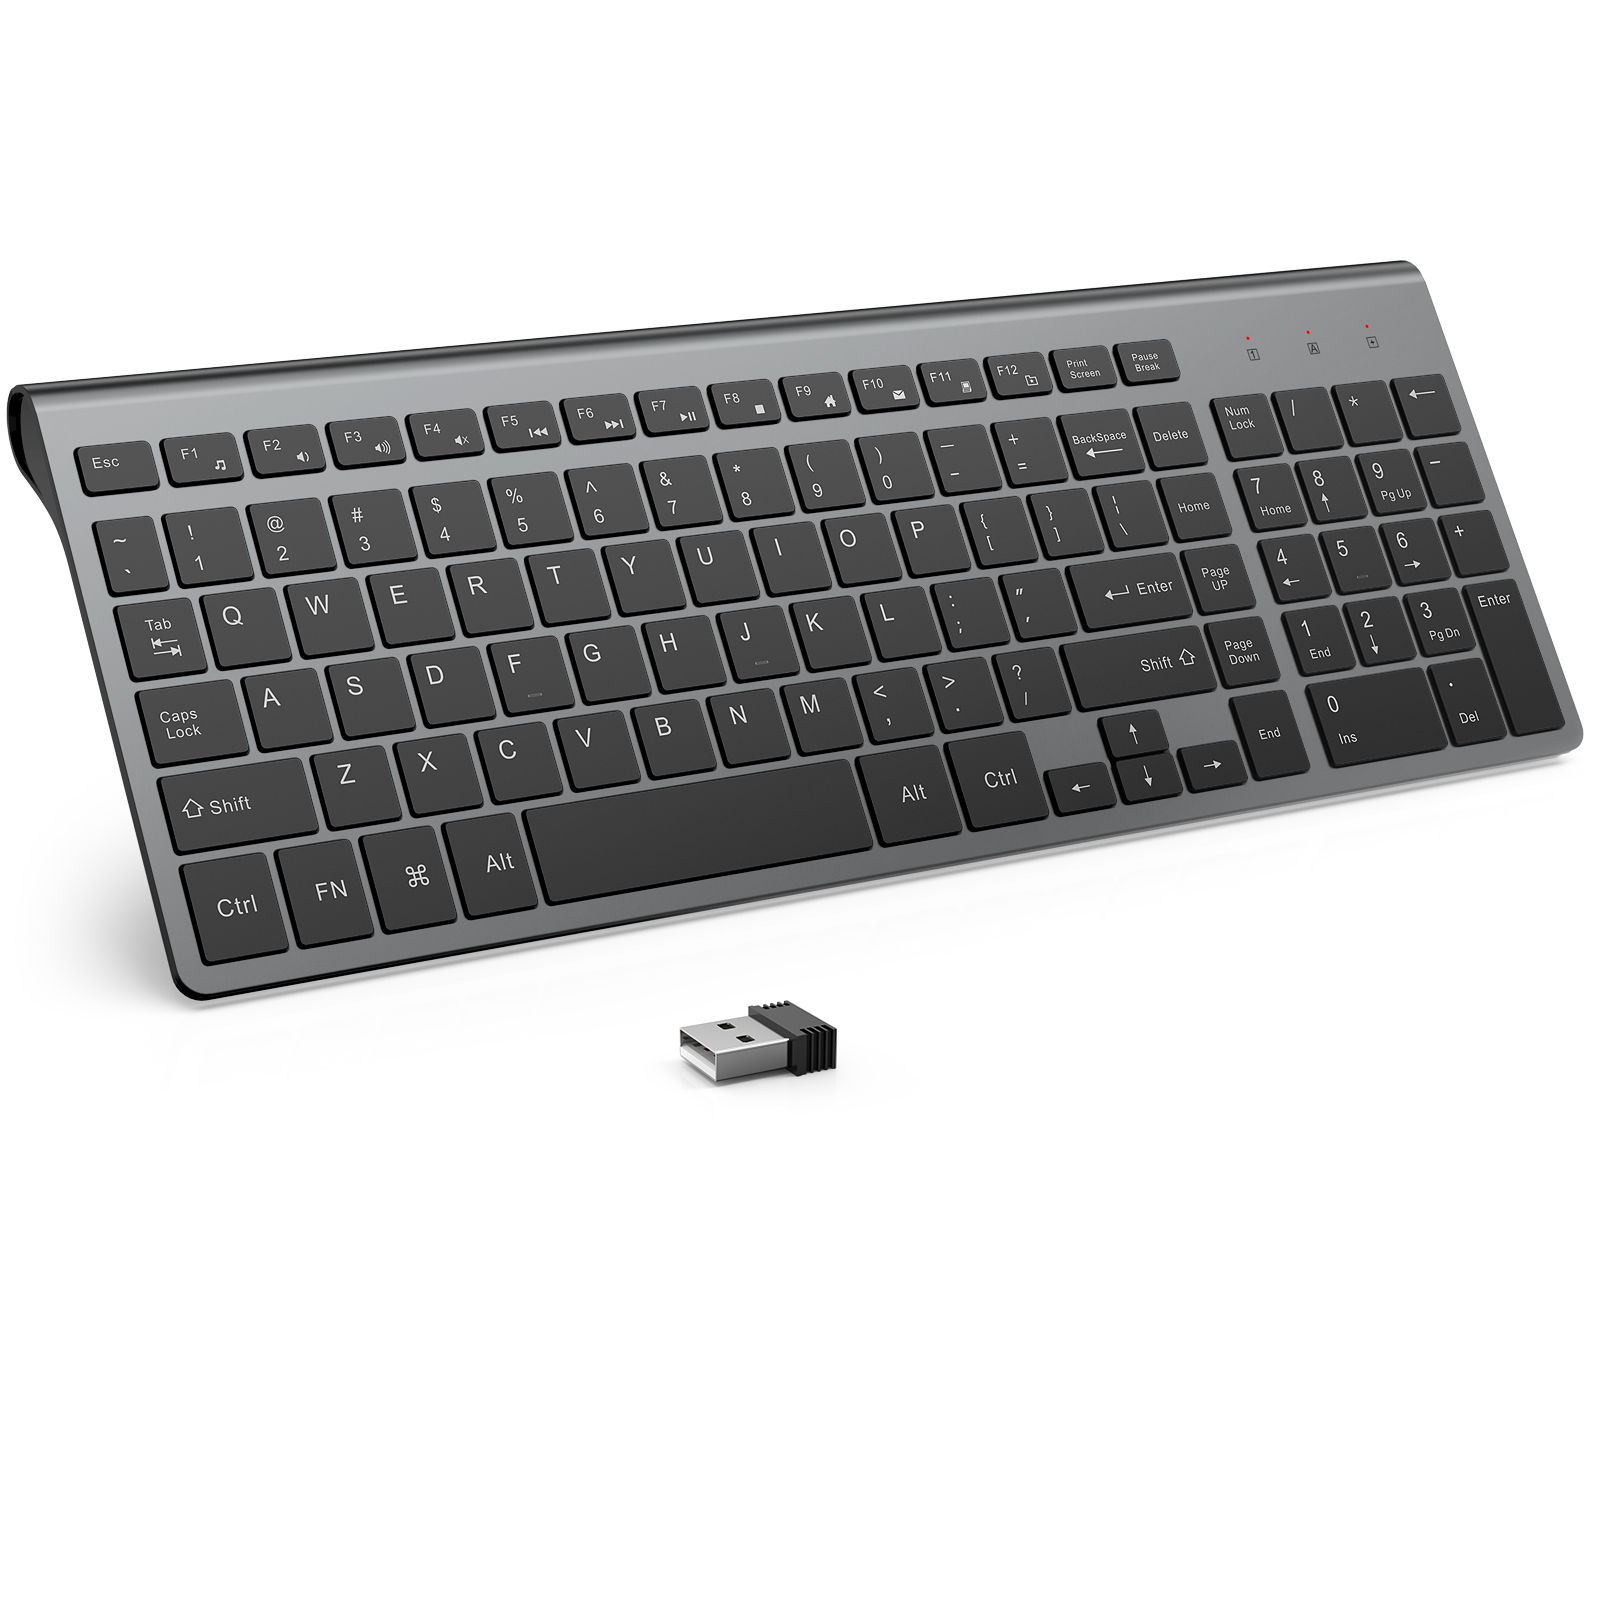 Wireless Keyboard, J JOYACCESS 2.4G Slim and Compact Wireless Keyboard with Numeric Pad for Laptop, MacBook Air, Apple, Computer, PC(Black and Grey)Wireless Keyboard and Mouse, J JOYACCESS USB Slim Wireless Keyboard Mouse with Numeric Keypad Compatible with iMac Mac PC Laptop Tablet Computer Windows (Silver White)
